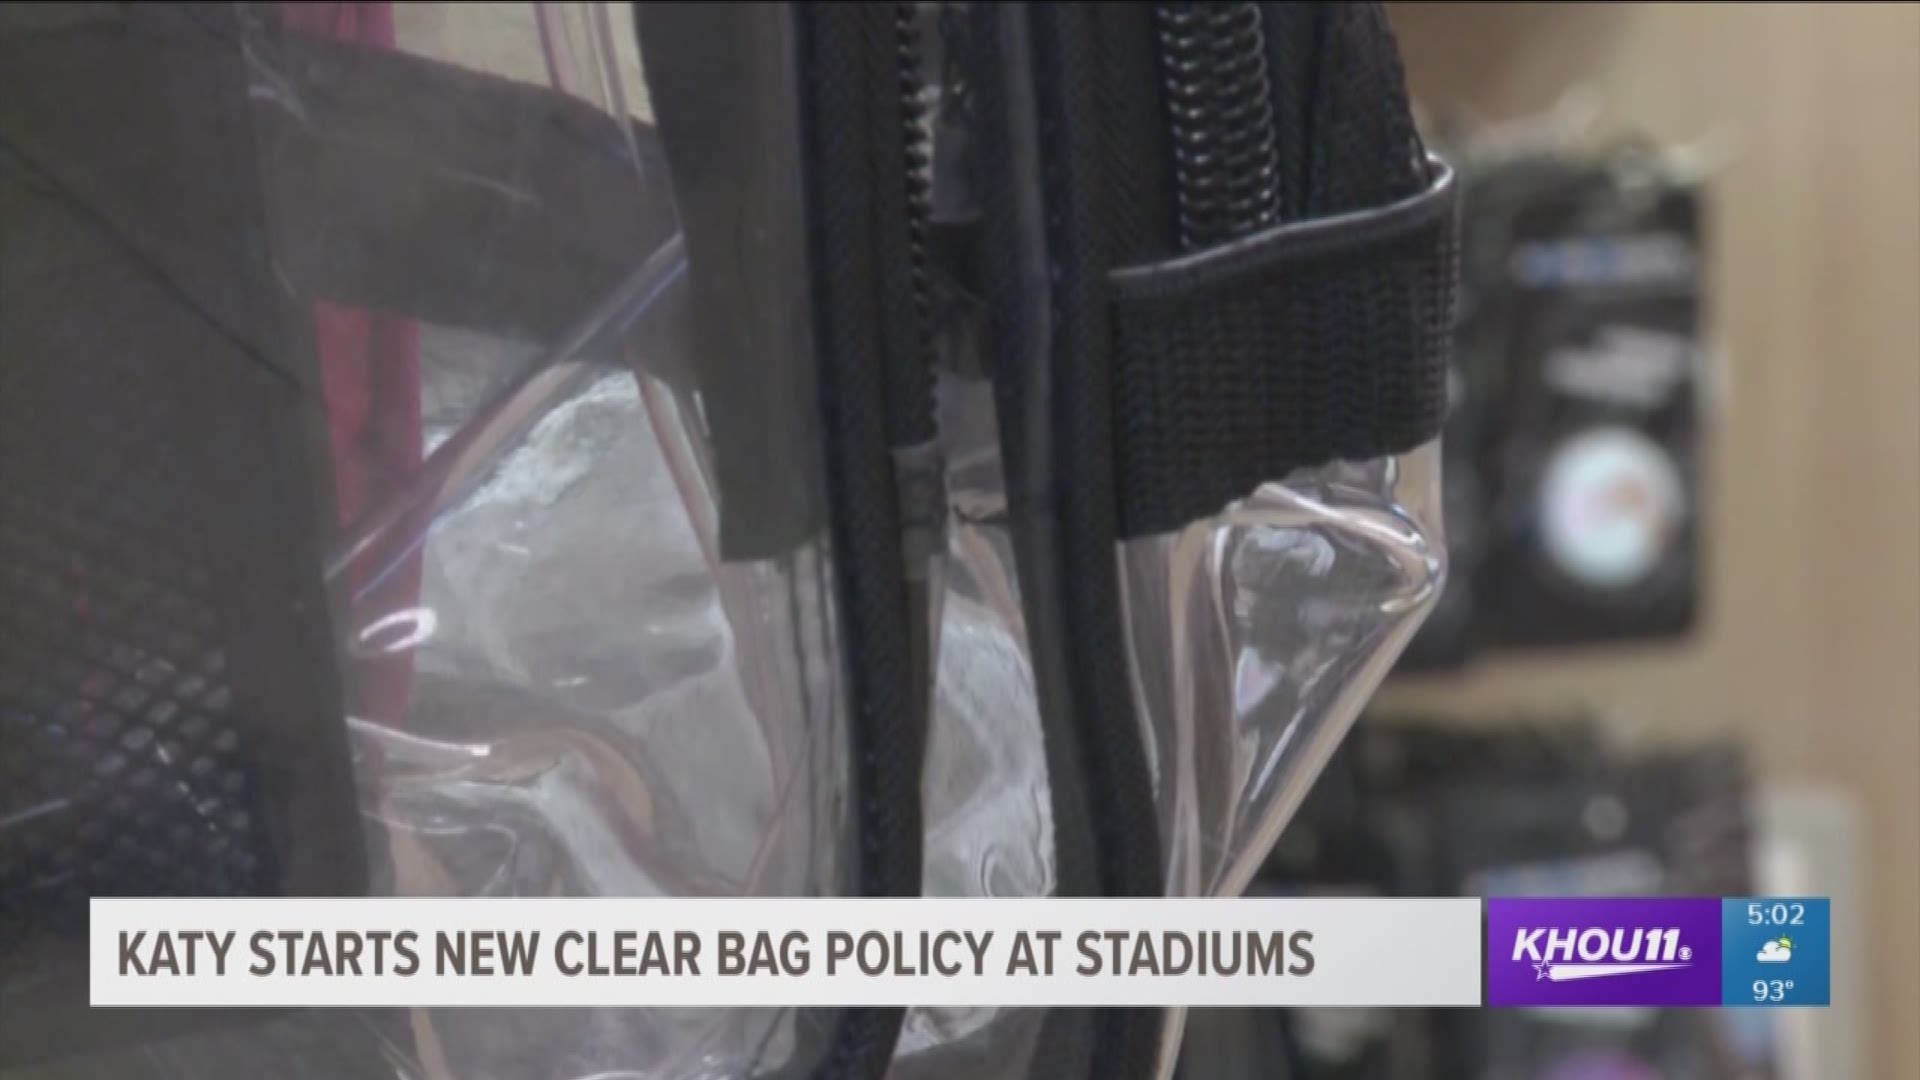 When fans enter Legacy Stadium in Katy, they'll have to bring in clear bags.